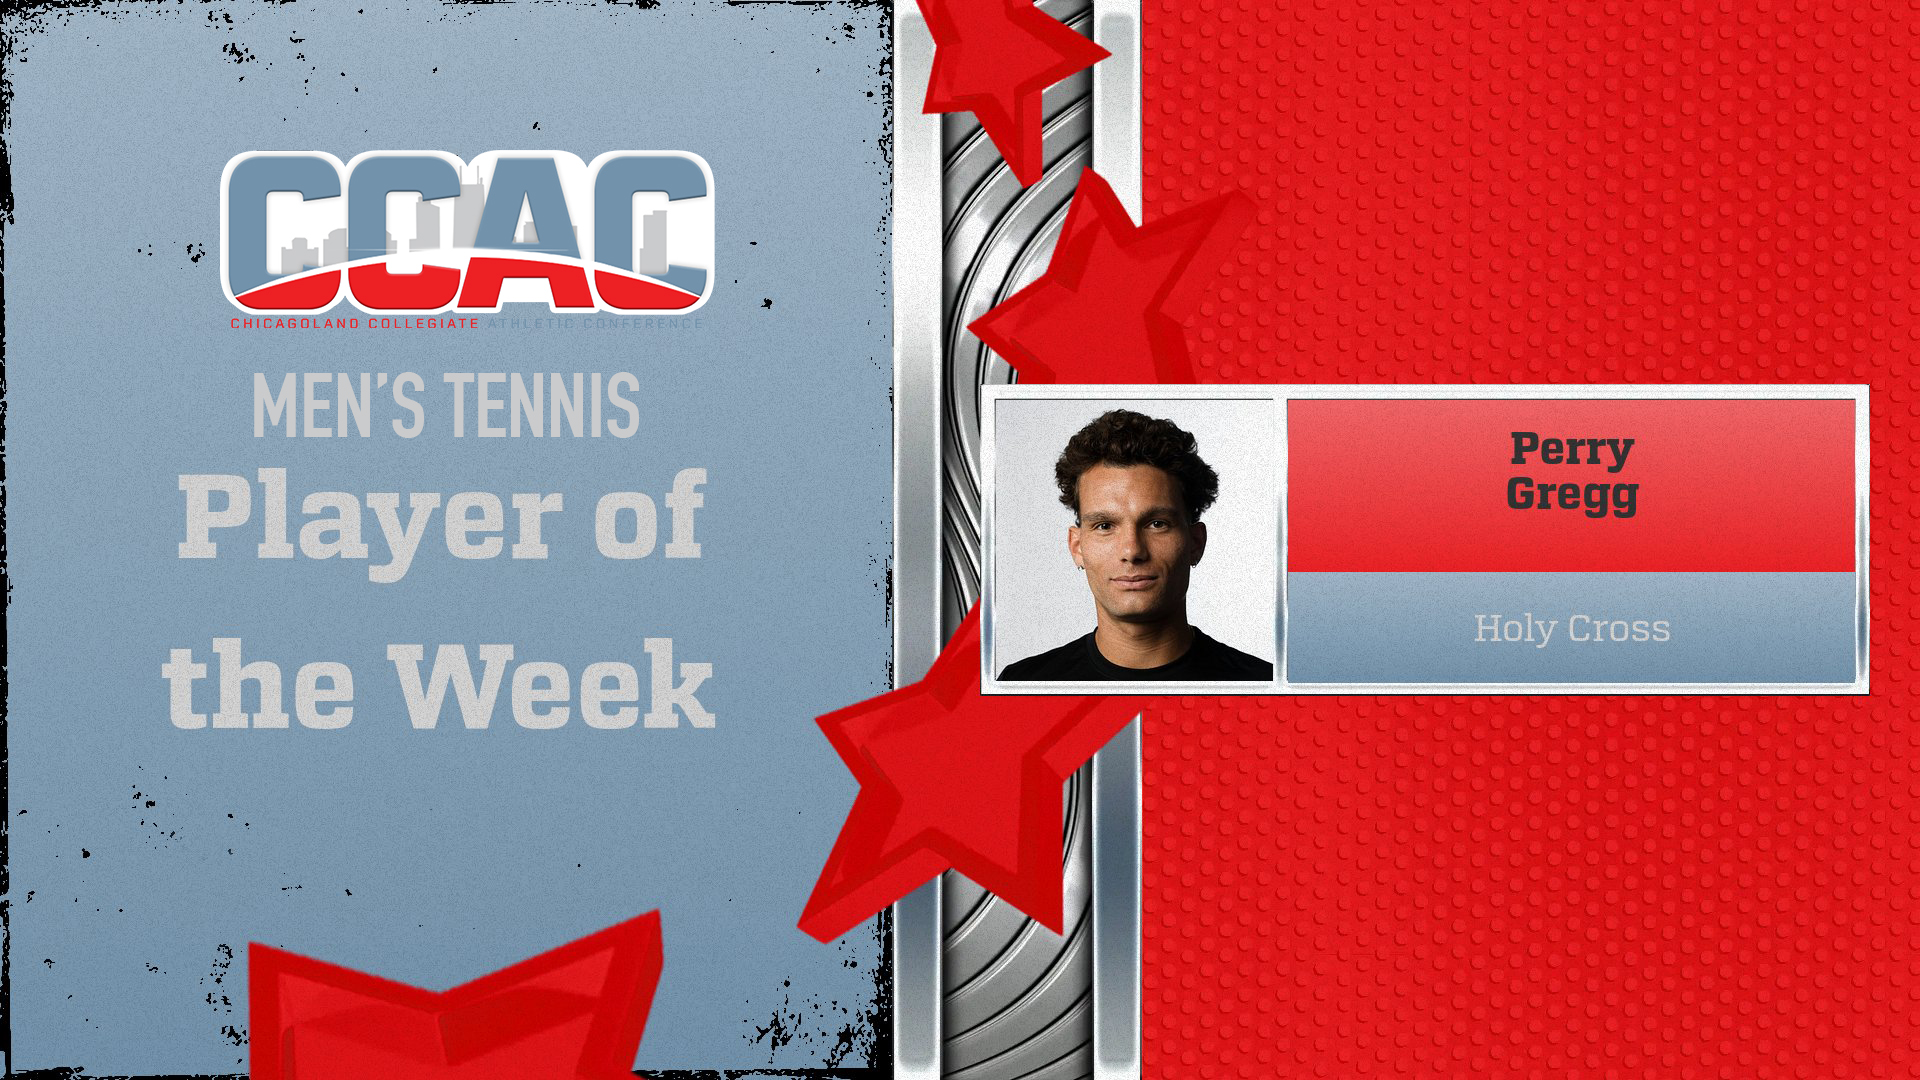 Holy Cross' Perry Named Men's Tennis Player of the Week